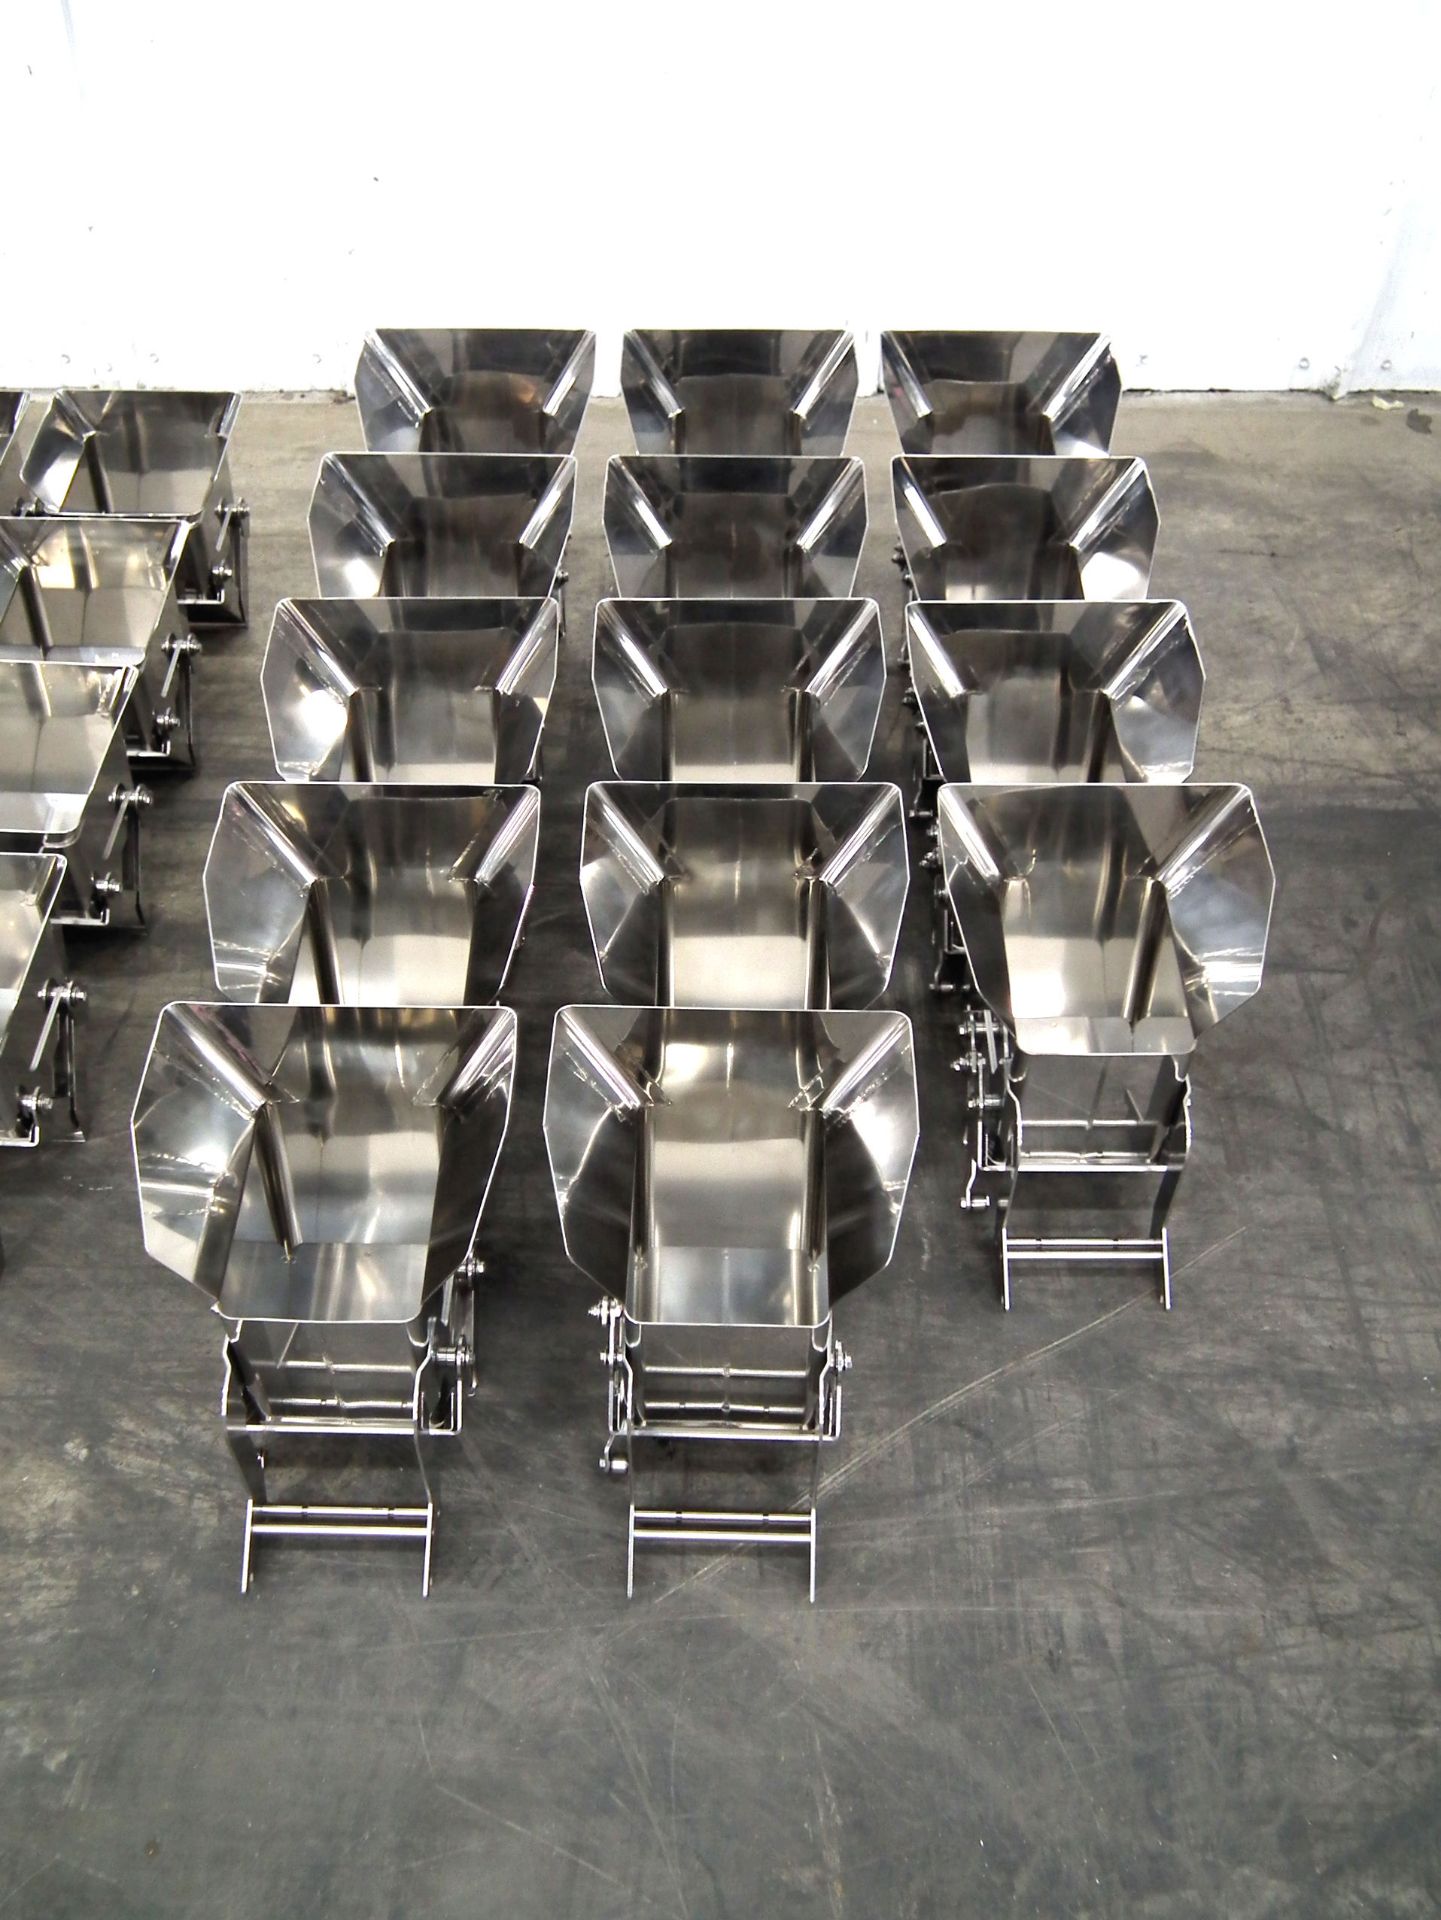 Ishida 14 Head Scale Buckets and Cones for CCW-214 - Image 6 of 10